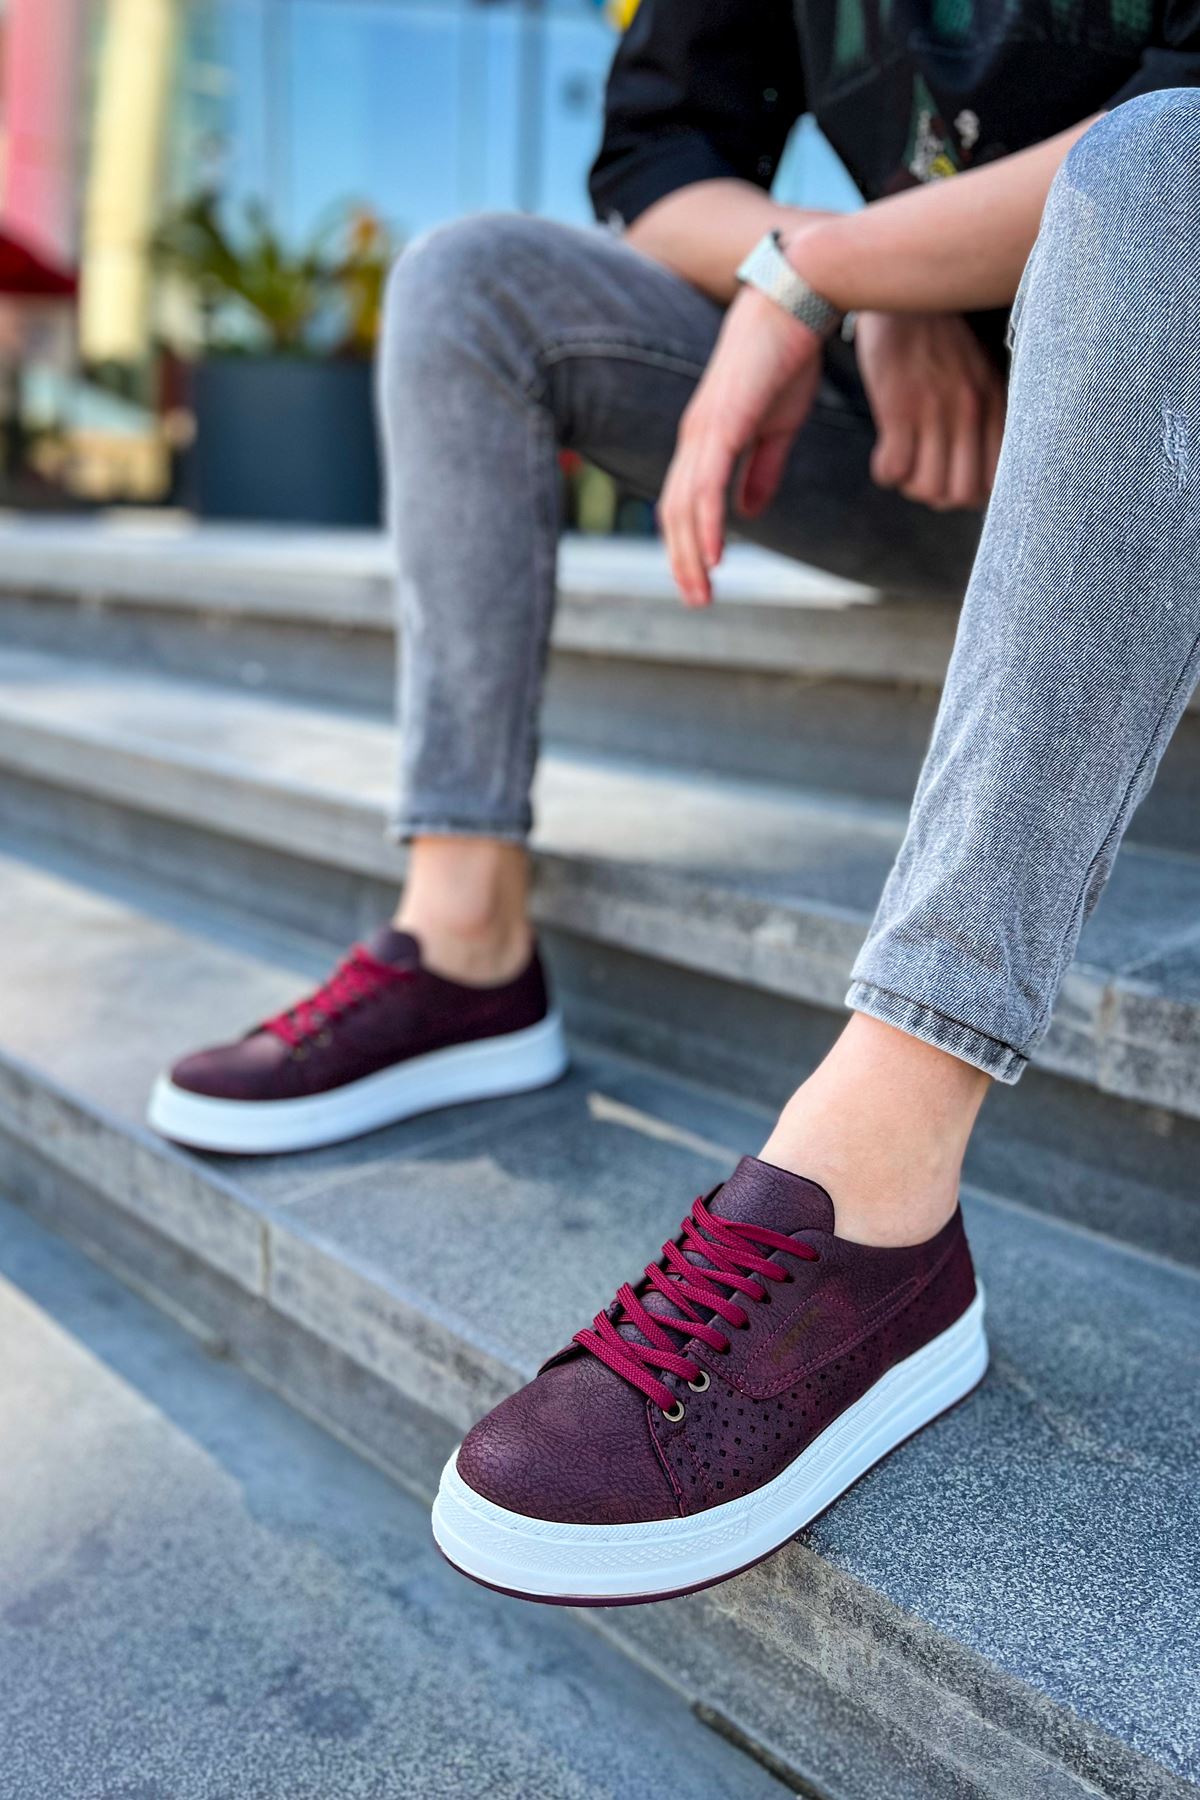 CH043 Men's Unisex Burgundy-White Sole Casual Shoes - STREETMODE ™